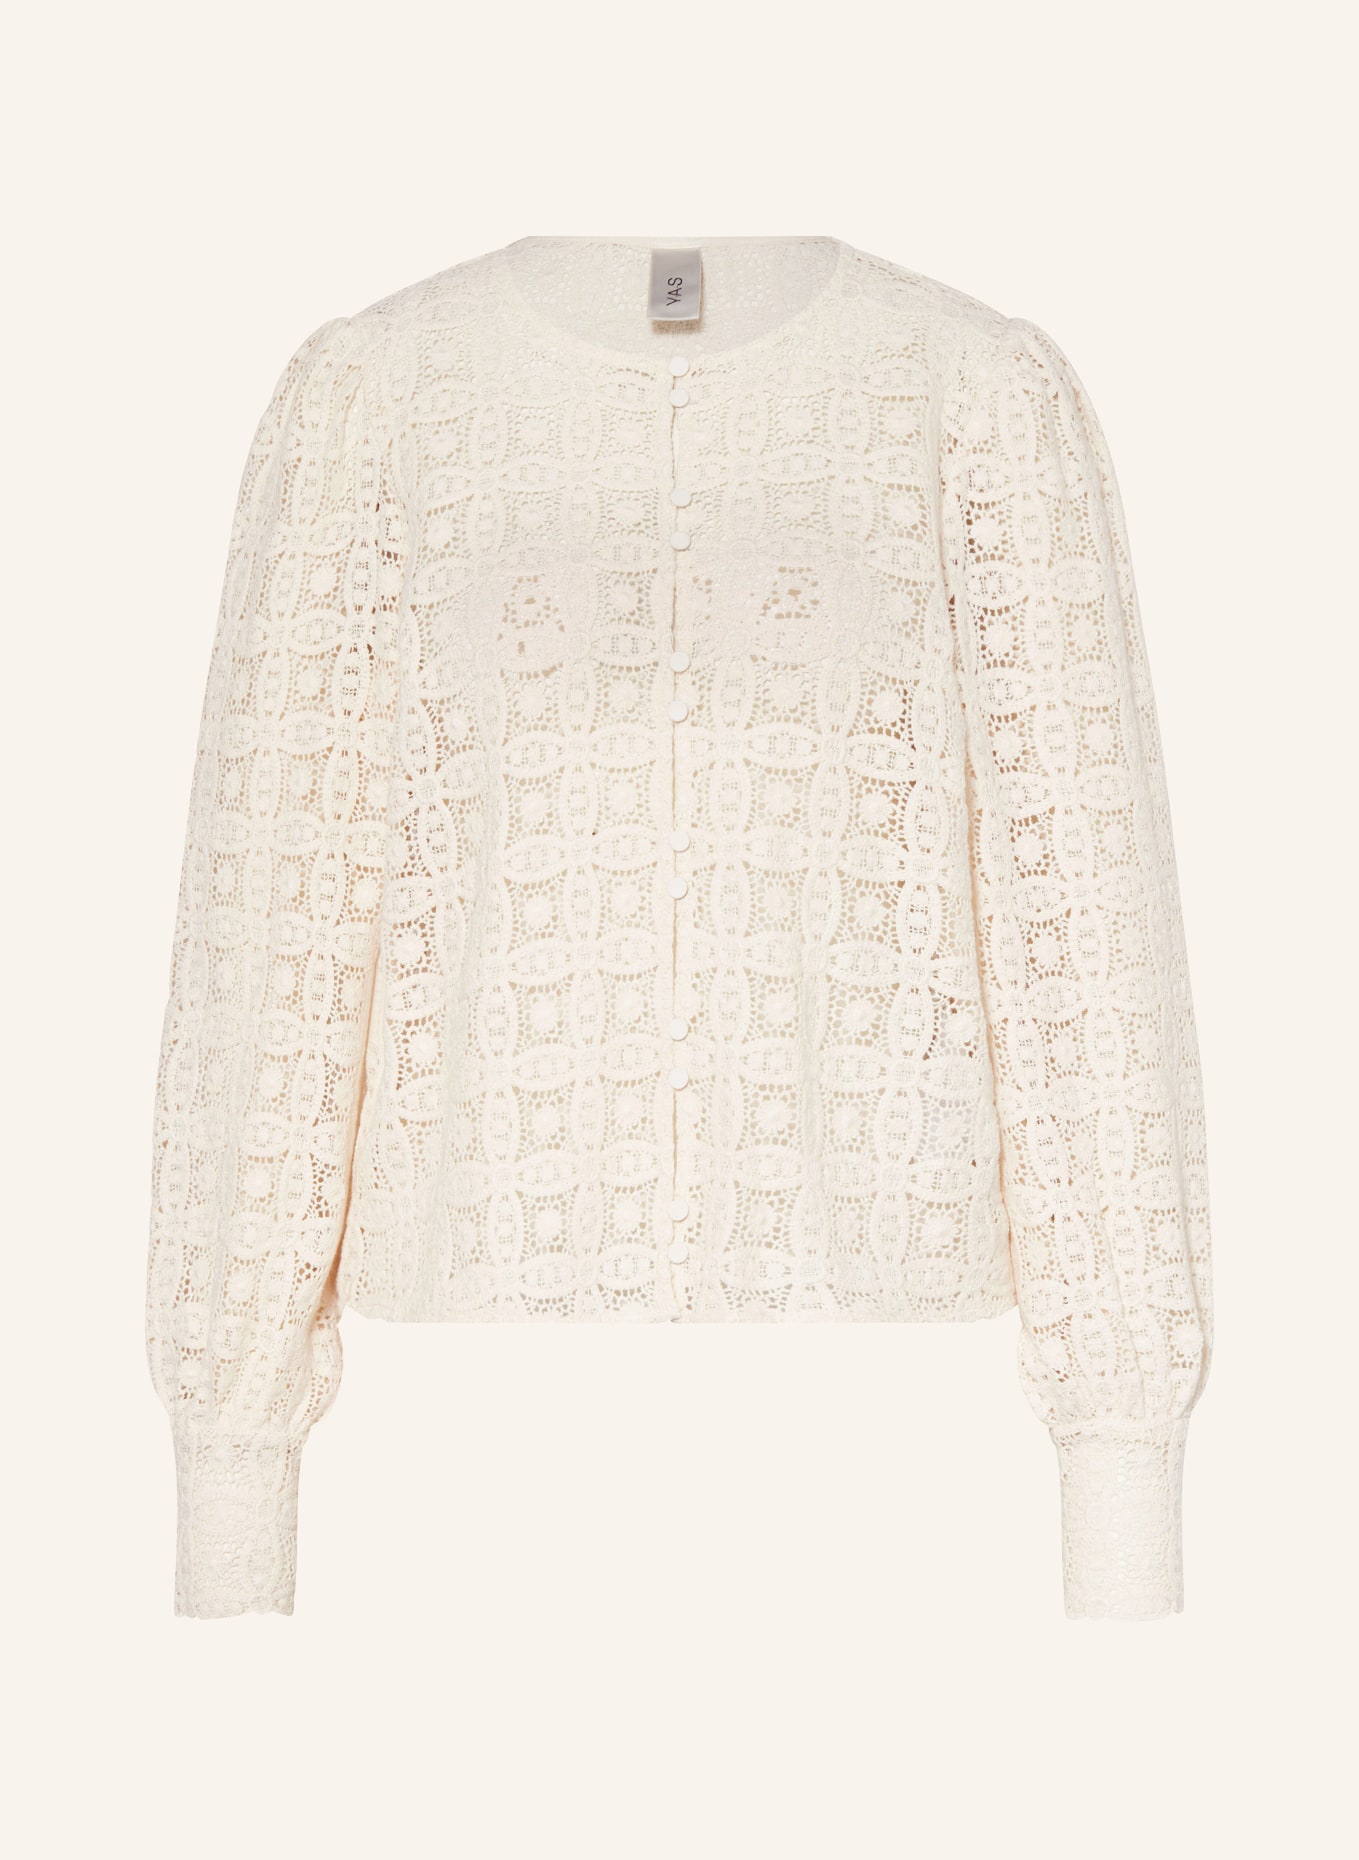 Y.A.S. Blouse made of broderie anglaise, Color: CREAM (Image 1)